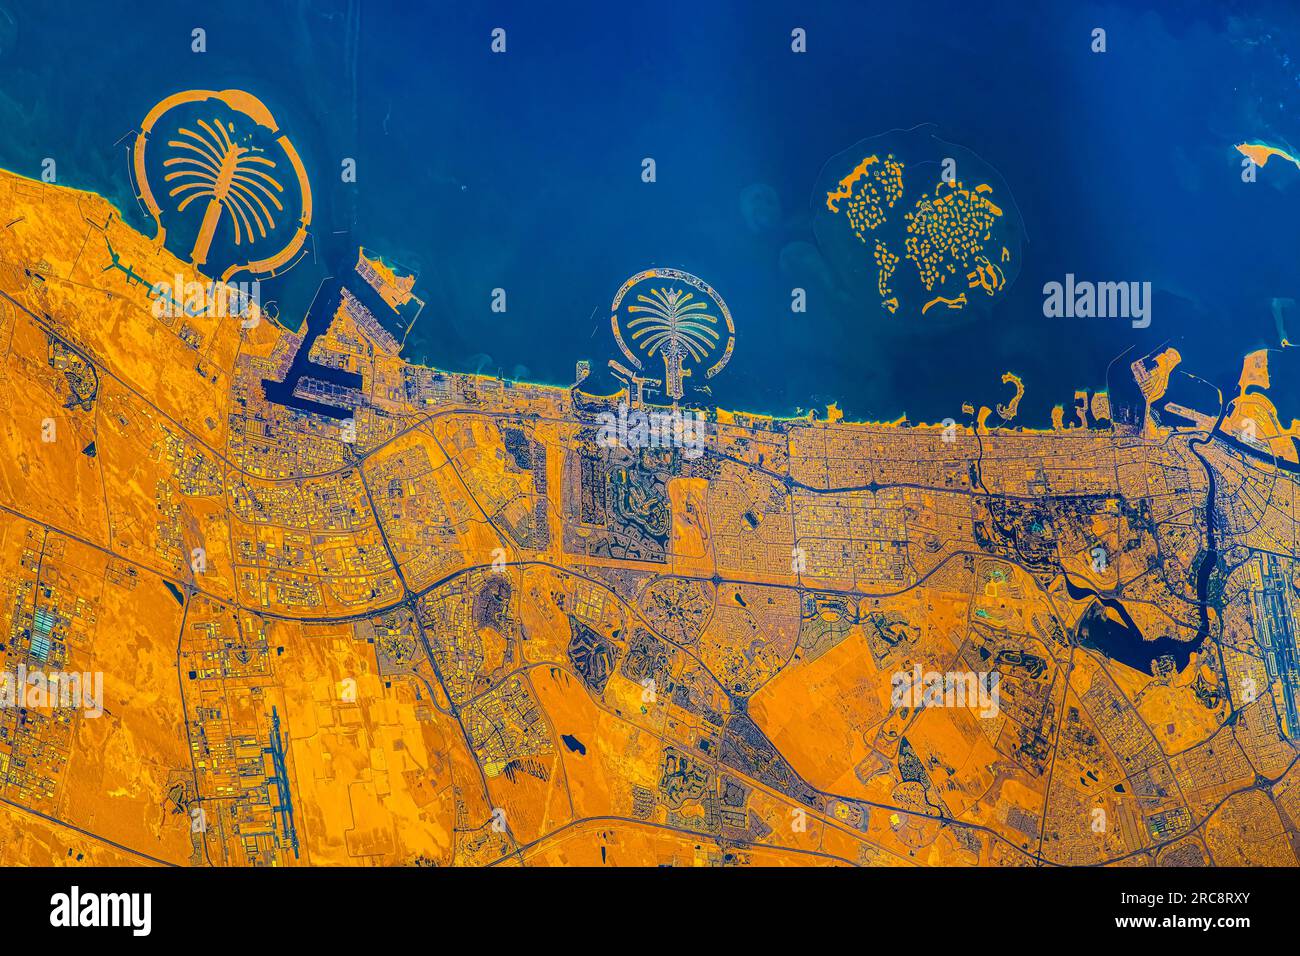 Palm Jumeirah and Palm Jabel Ali, artificial islands in Dubai, United Arab Emirates. Image by NASA. Media usage guidelines: https://www.nasa.gov/multi Stock Photo